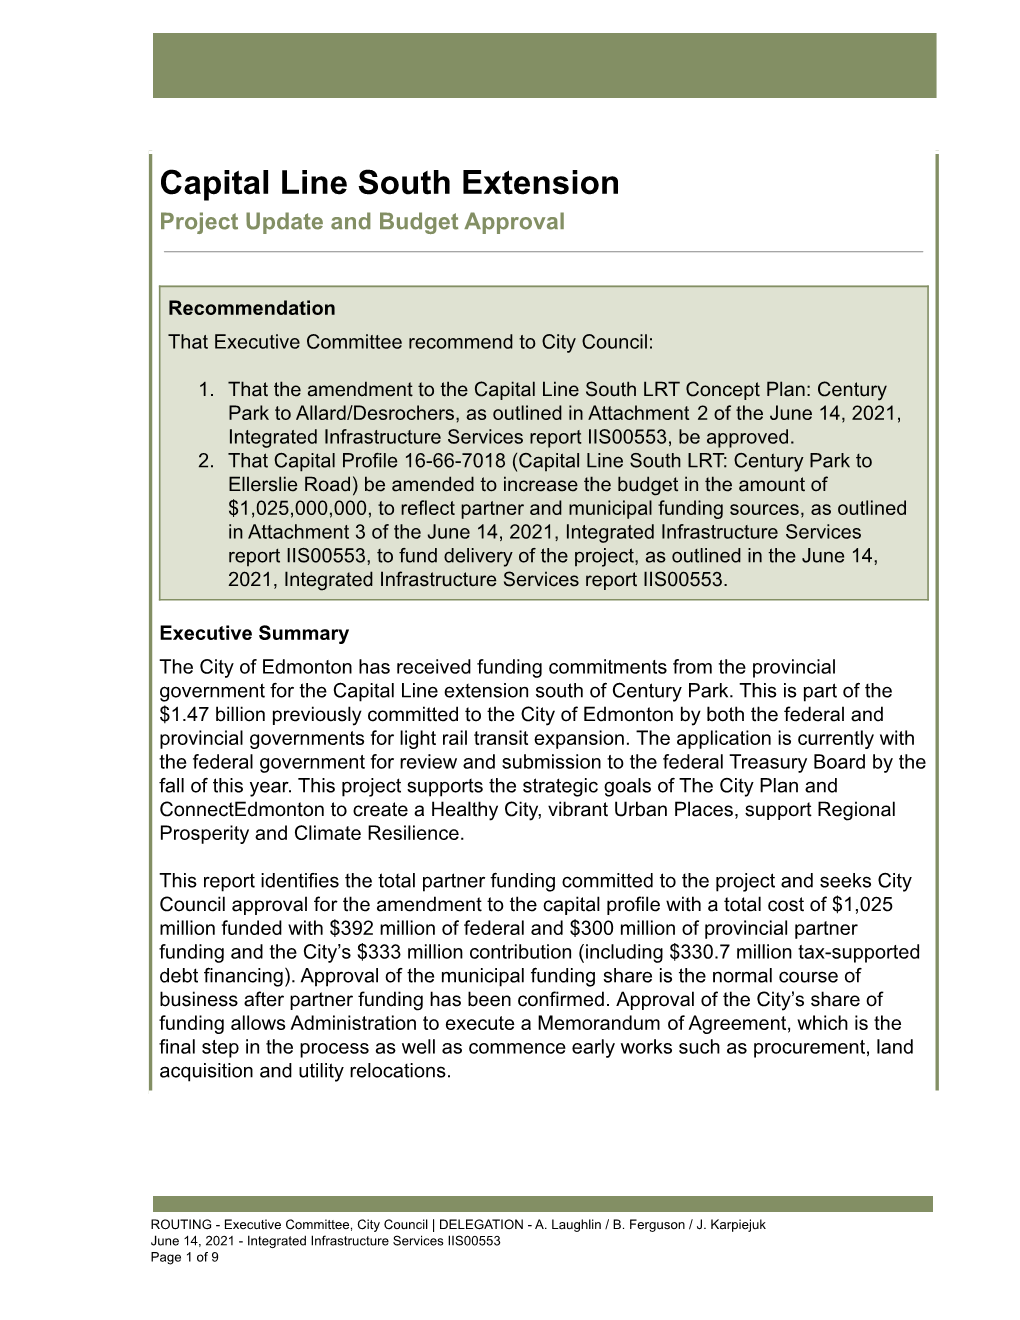 IIS00553 Capital Line South Extension - Project Update and Budget Approval